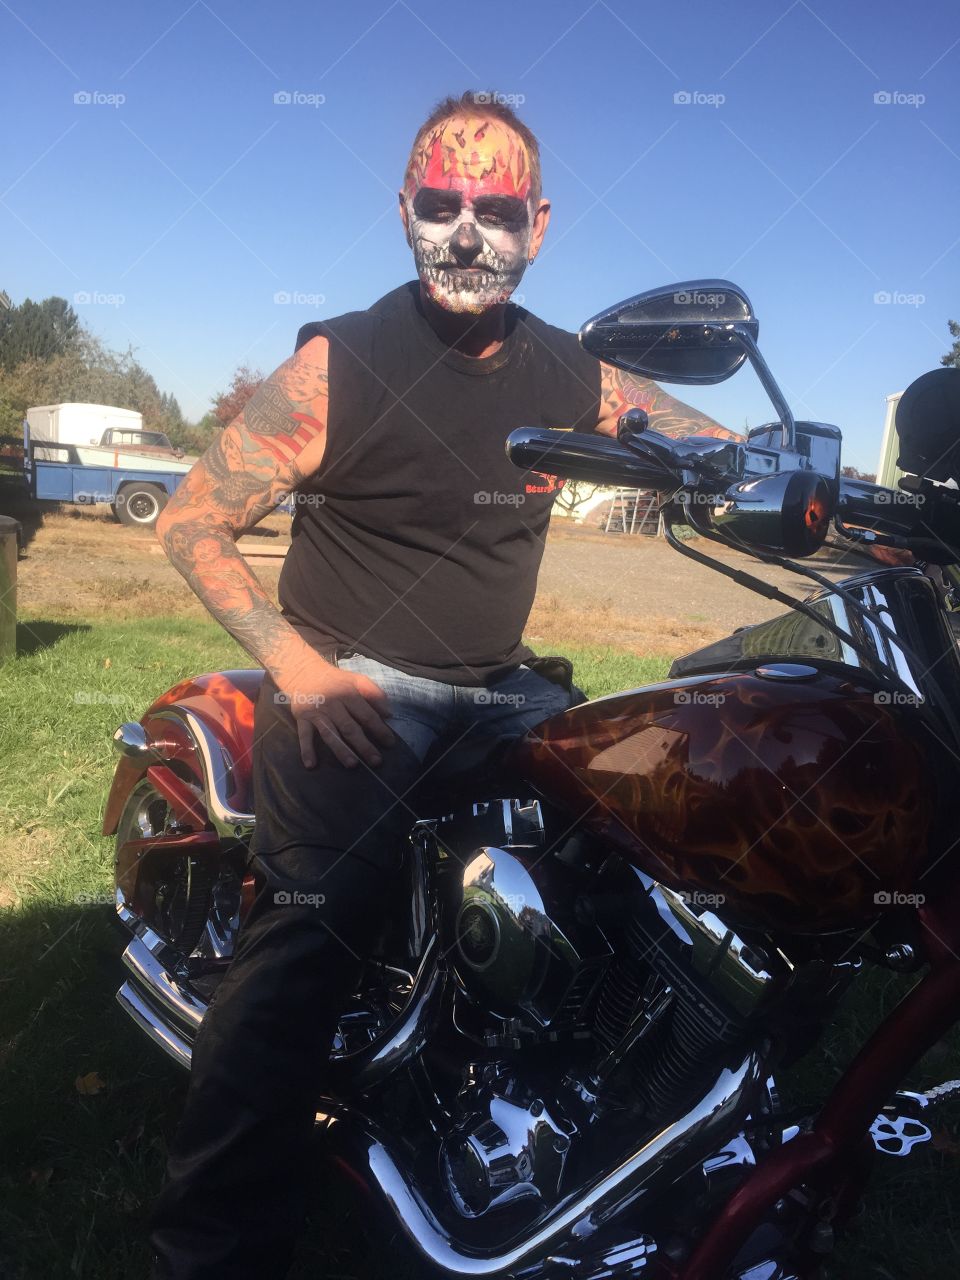 Ghost rider face paint 